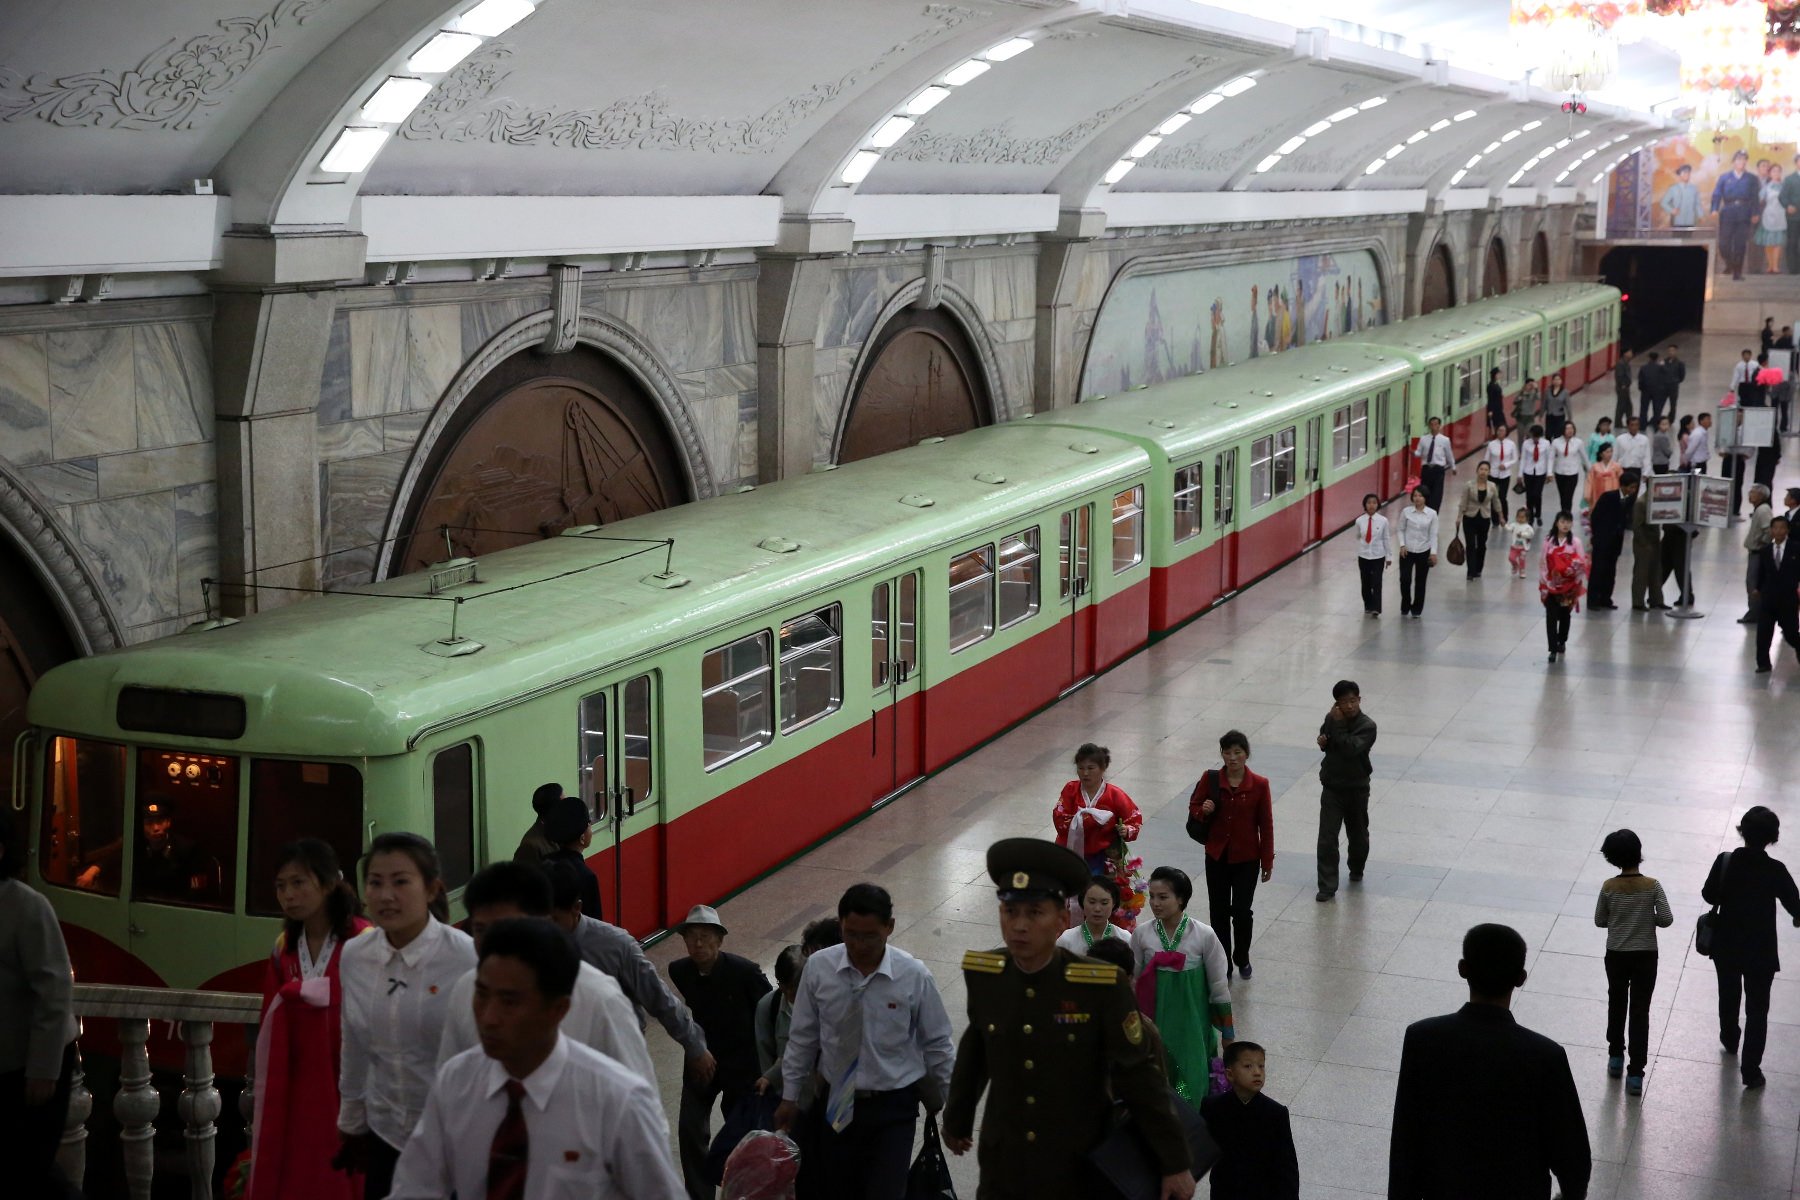 Entrance to the metro station in Pyongyang, North Korea. Visit the DPRK with KTG!